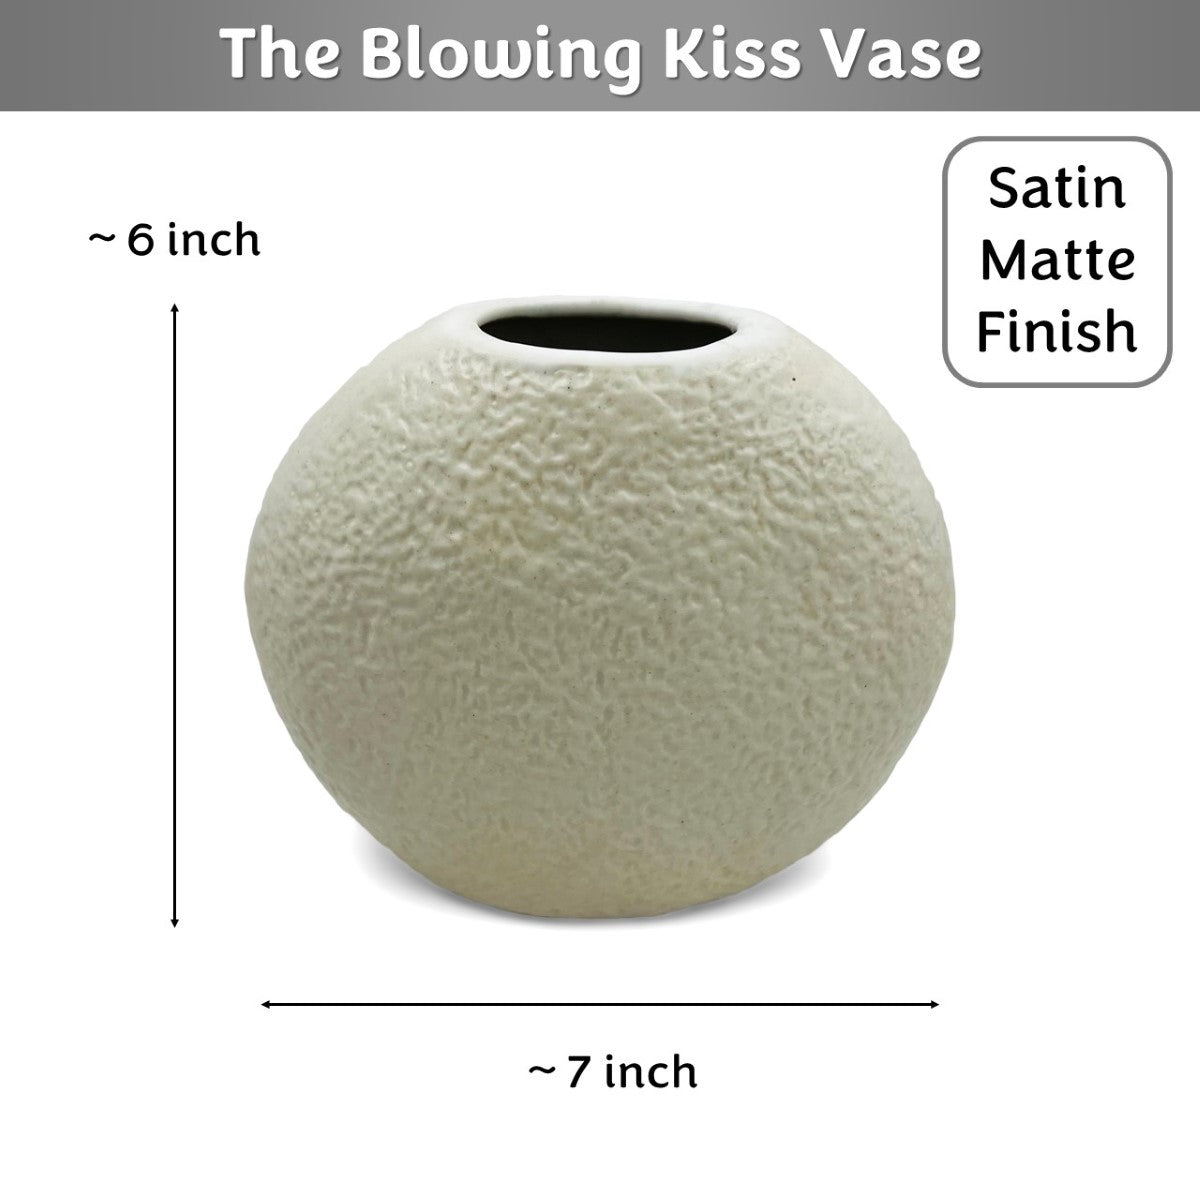 The Blowing Kiss Face Vase